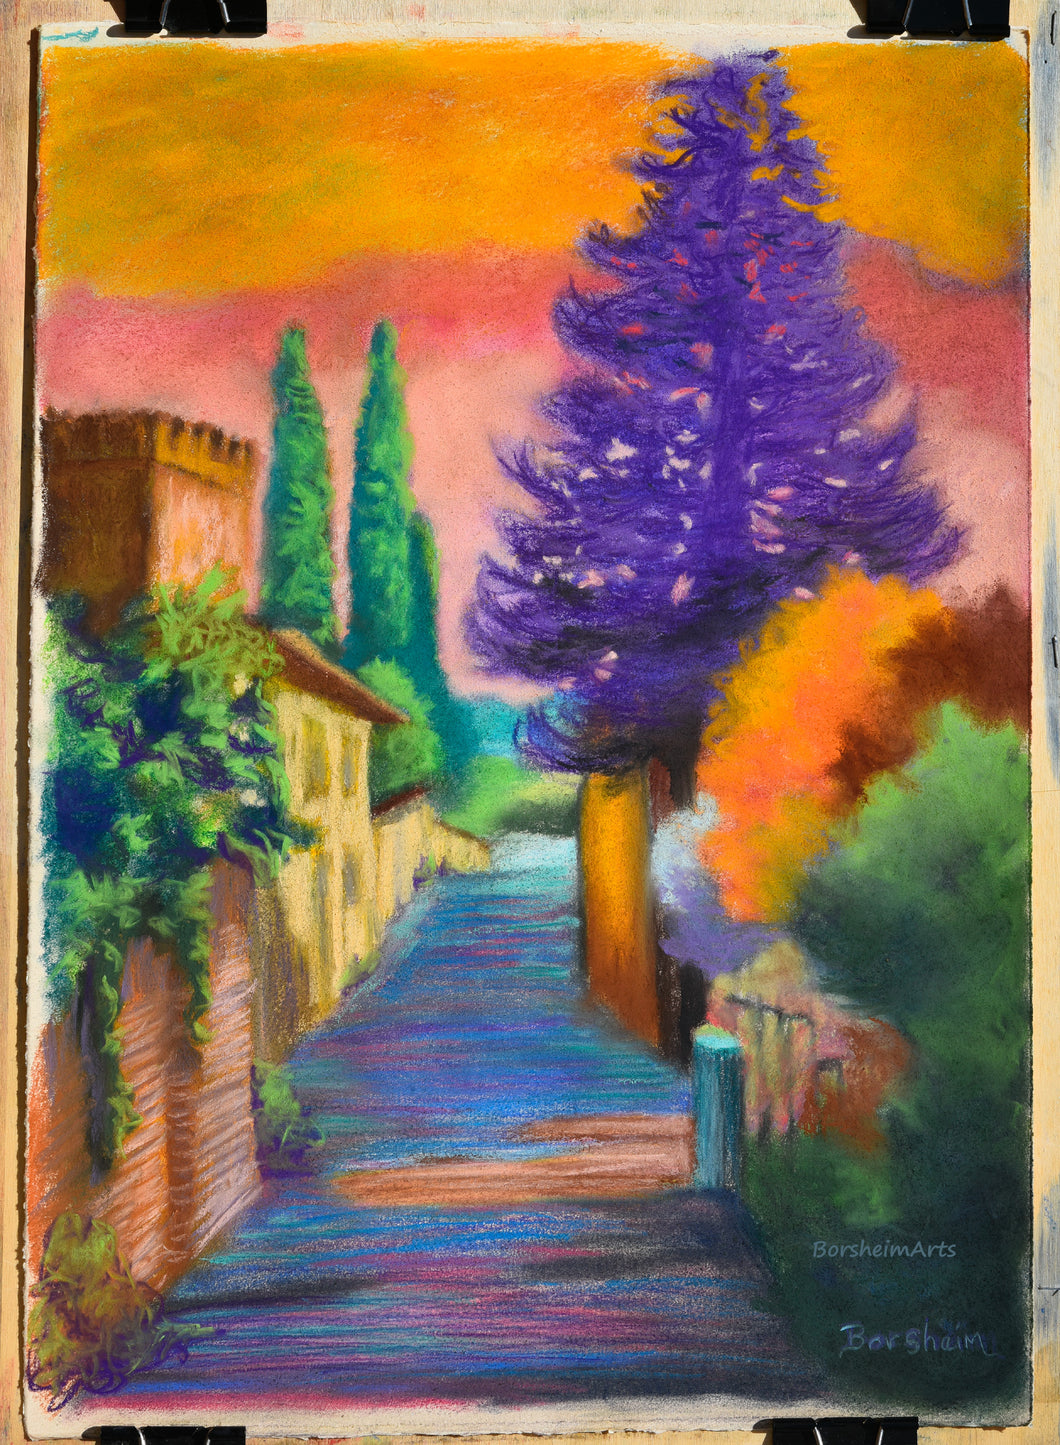 Settignano Purple Tree on a Tuscan road in Italy, I wanted to play with colors and thus, you see a large tree painted purple with a surrealistic colored yellow, orange and pink sky, contrasting with greens and turquoise accents. This is a fun and colorful scene in Tuscany that is different from most other artworks.